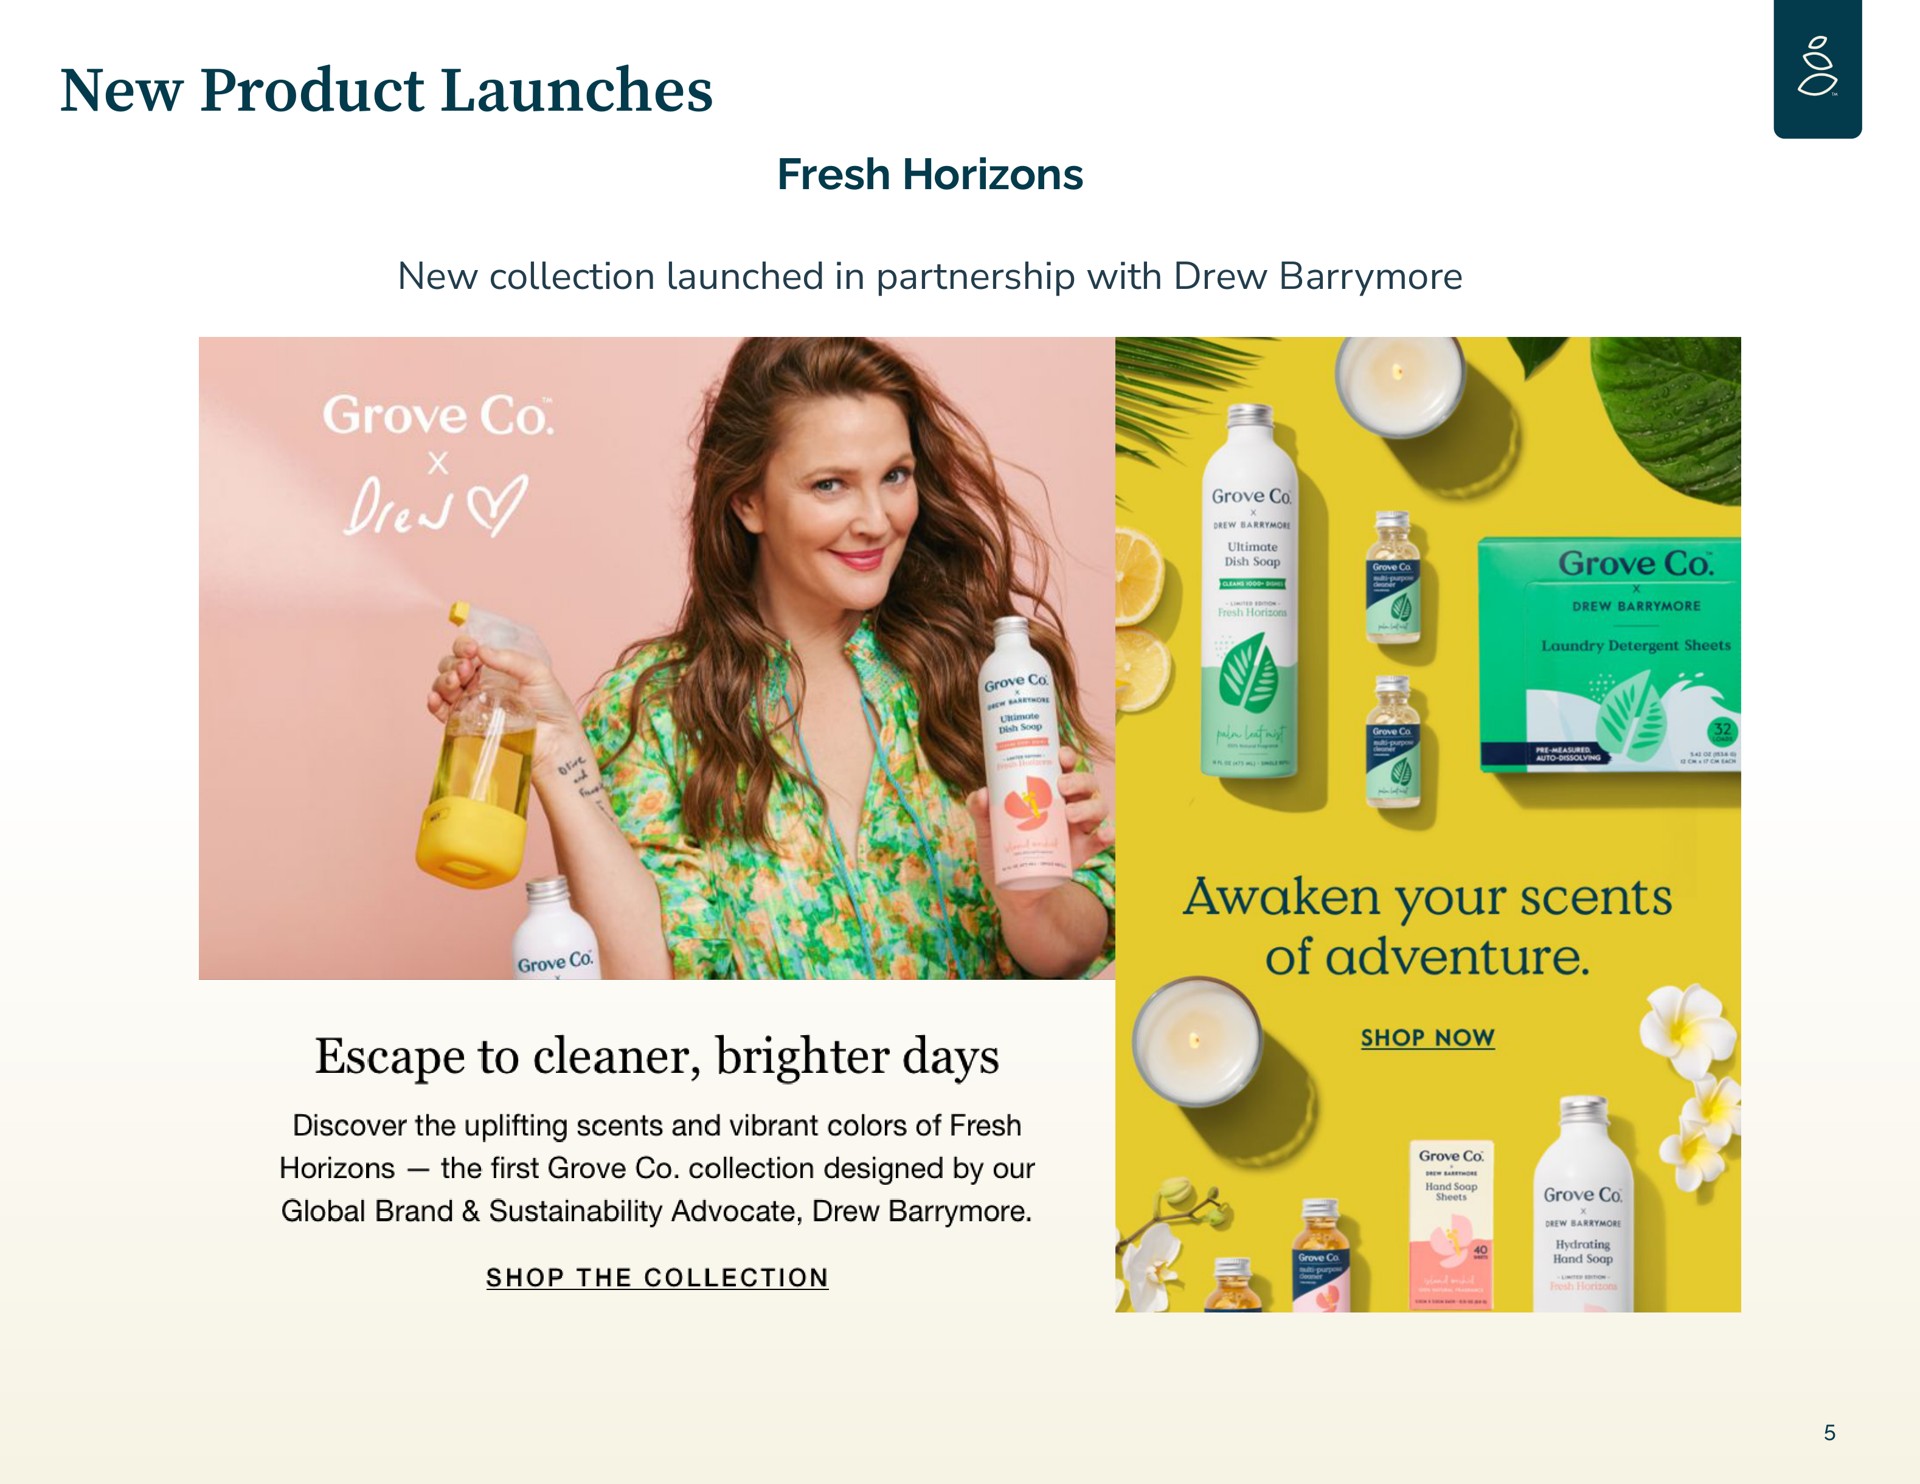 new product launches fresh horizons new collection launched in partnership with drew awaken your scents of adventure escape to cleaner days i | Grove